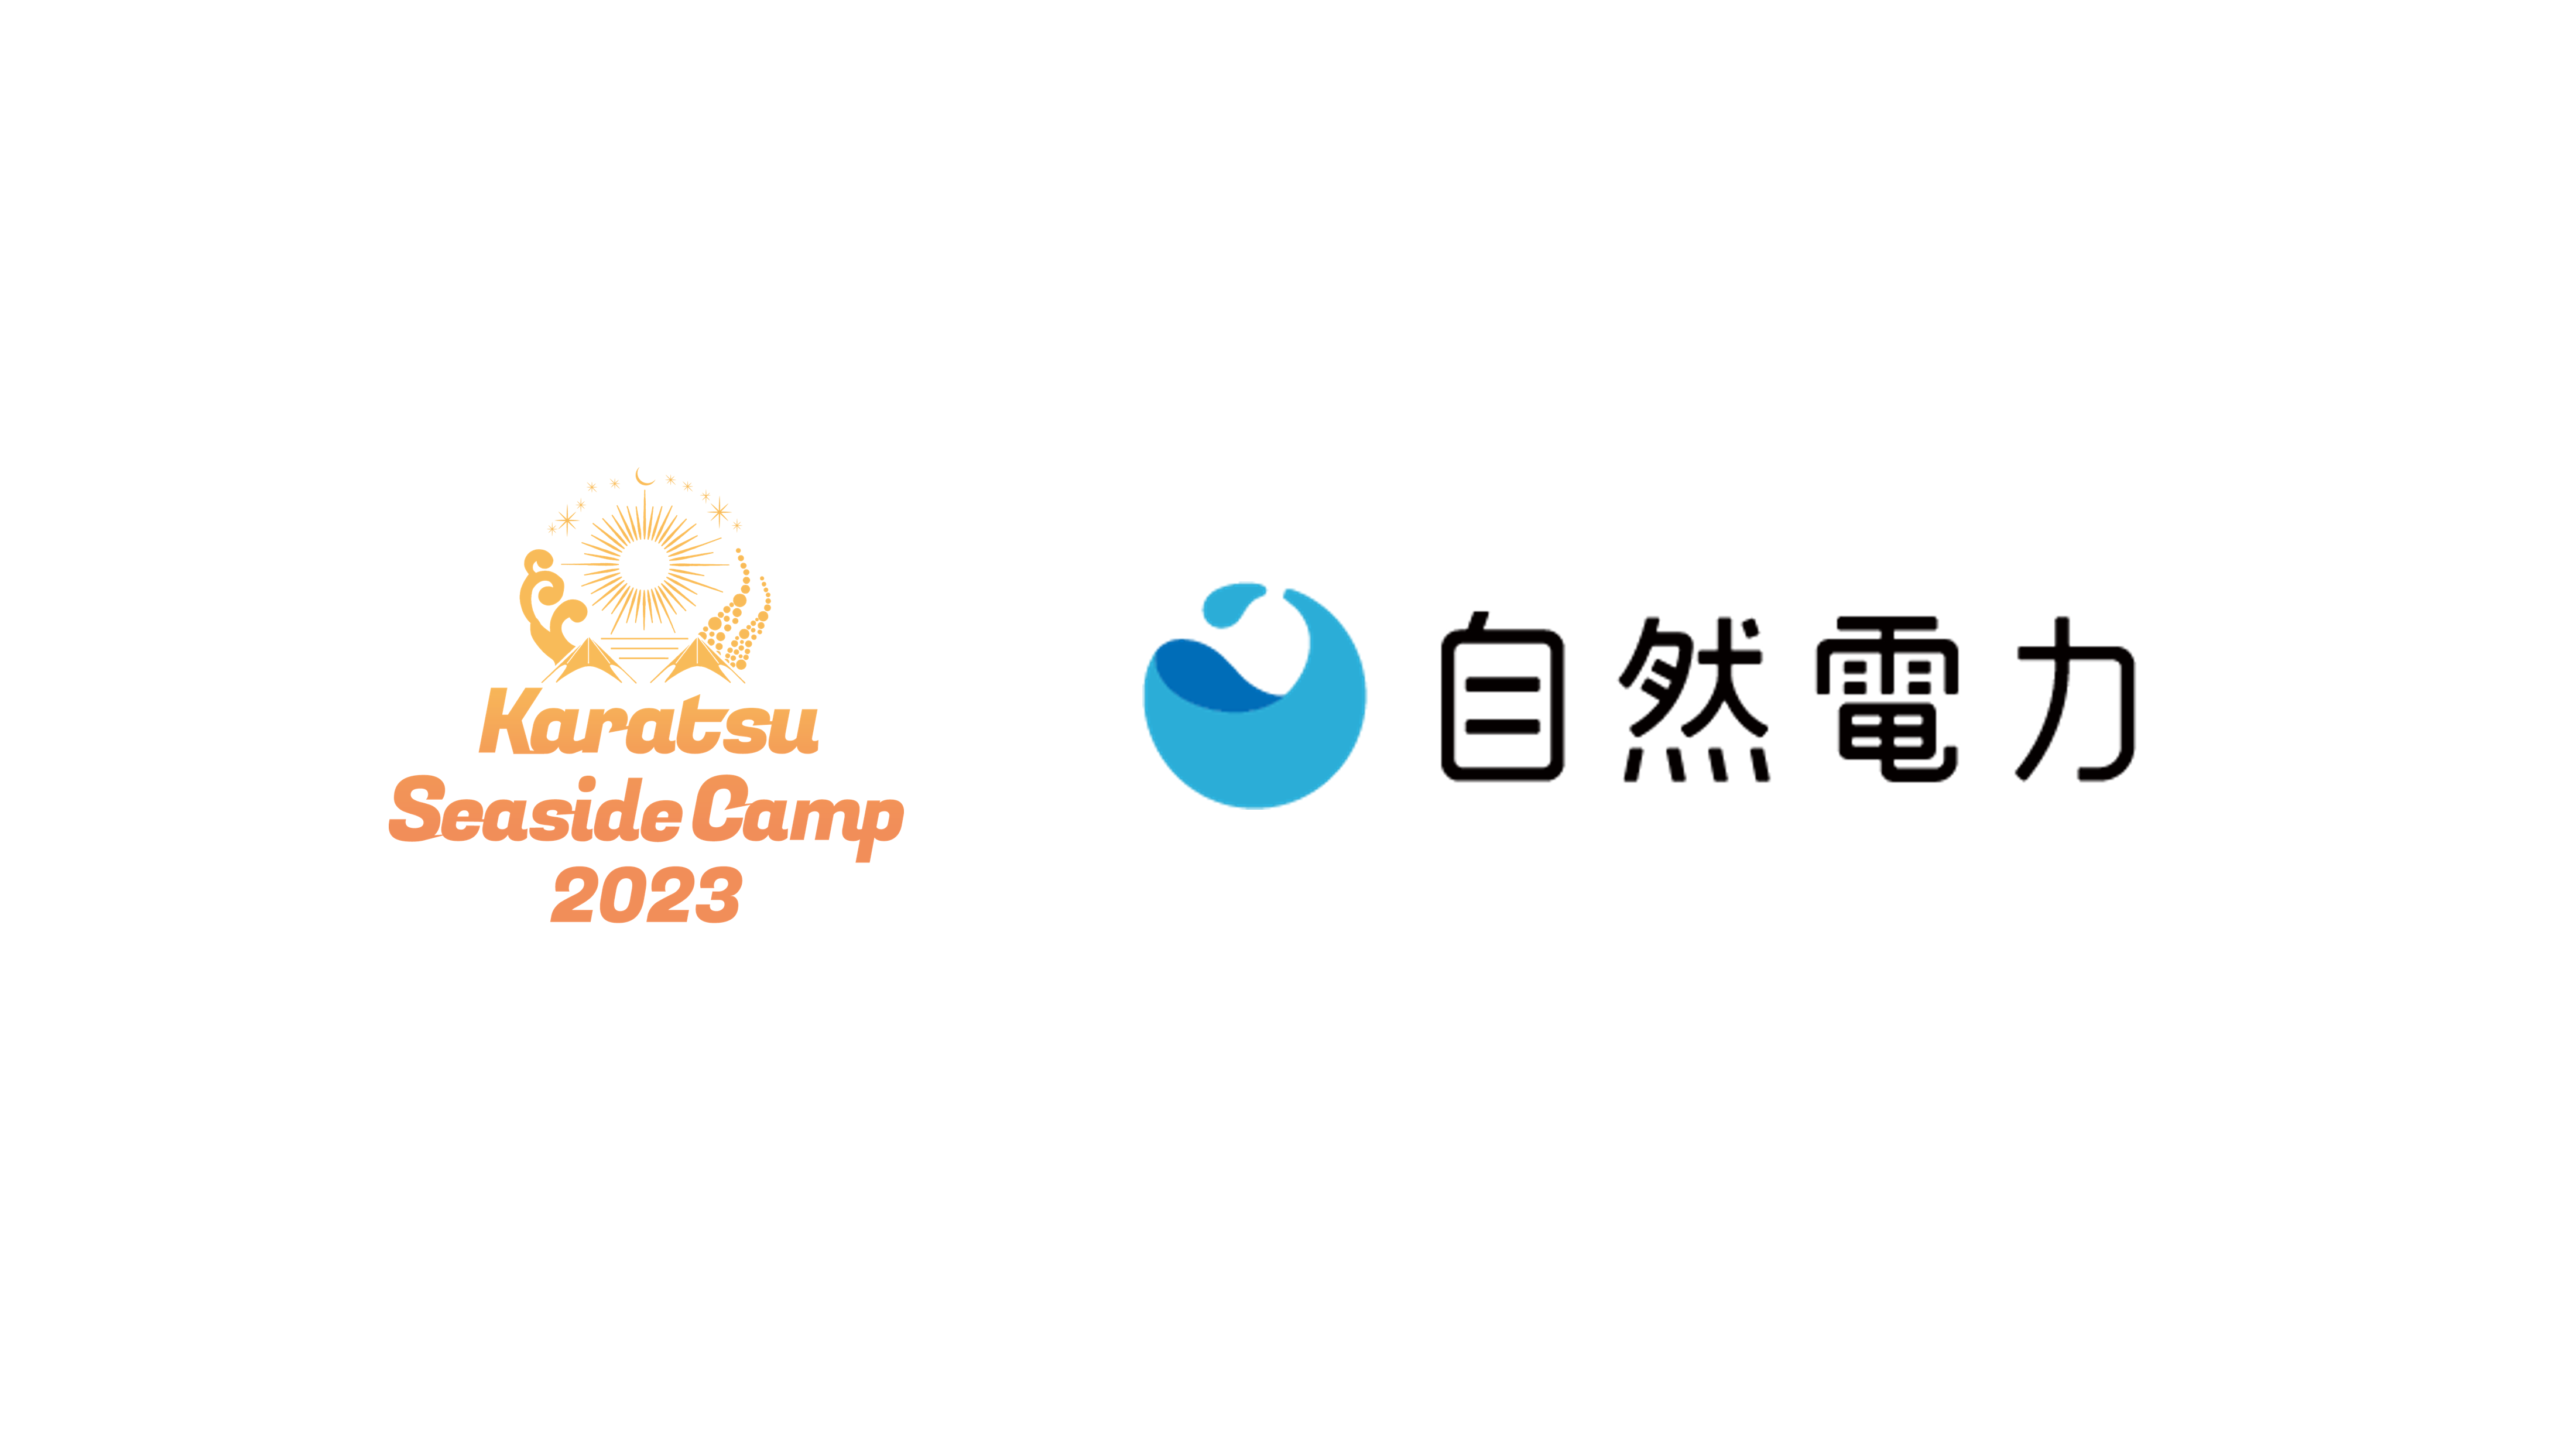 Shizen Energy supports Karatsu Seaside Camp 2023 with carbon offsetting